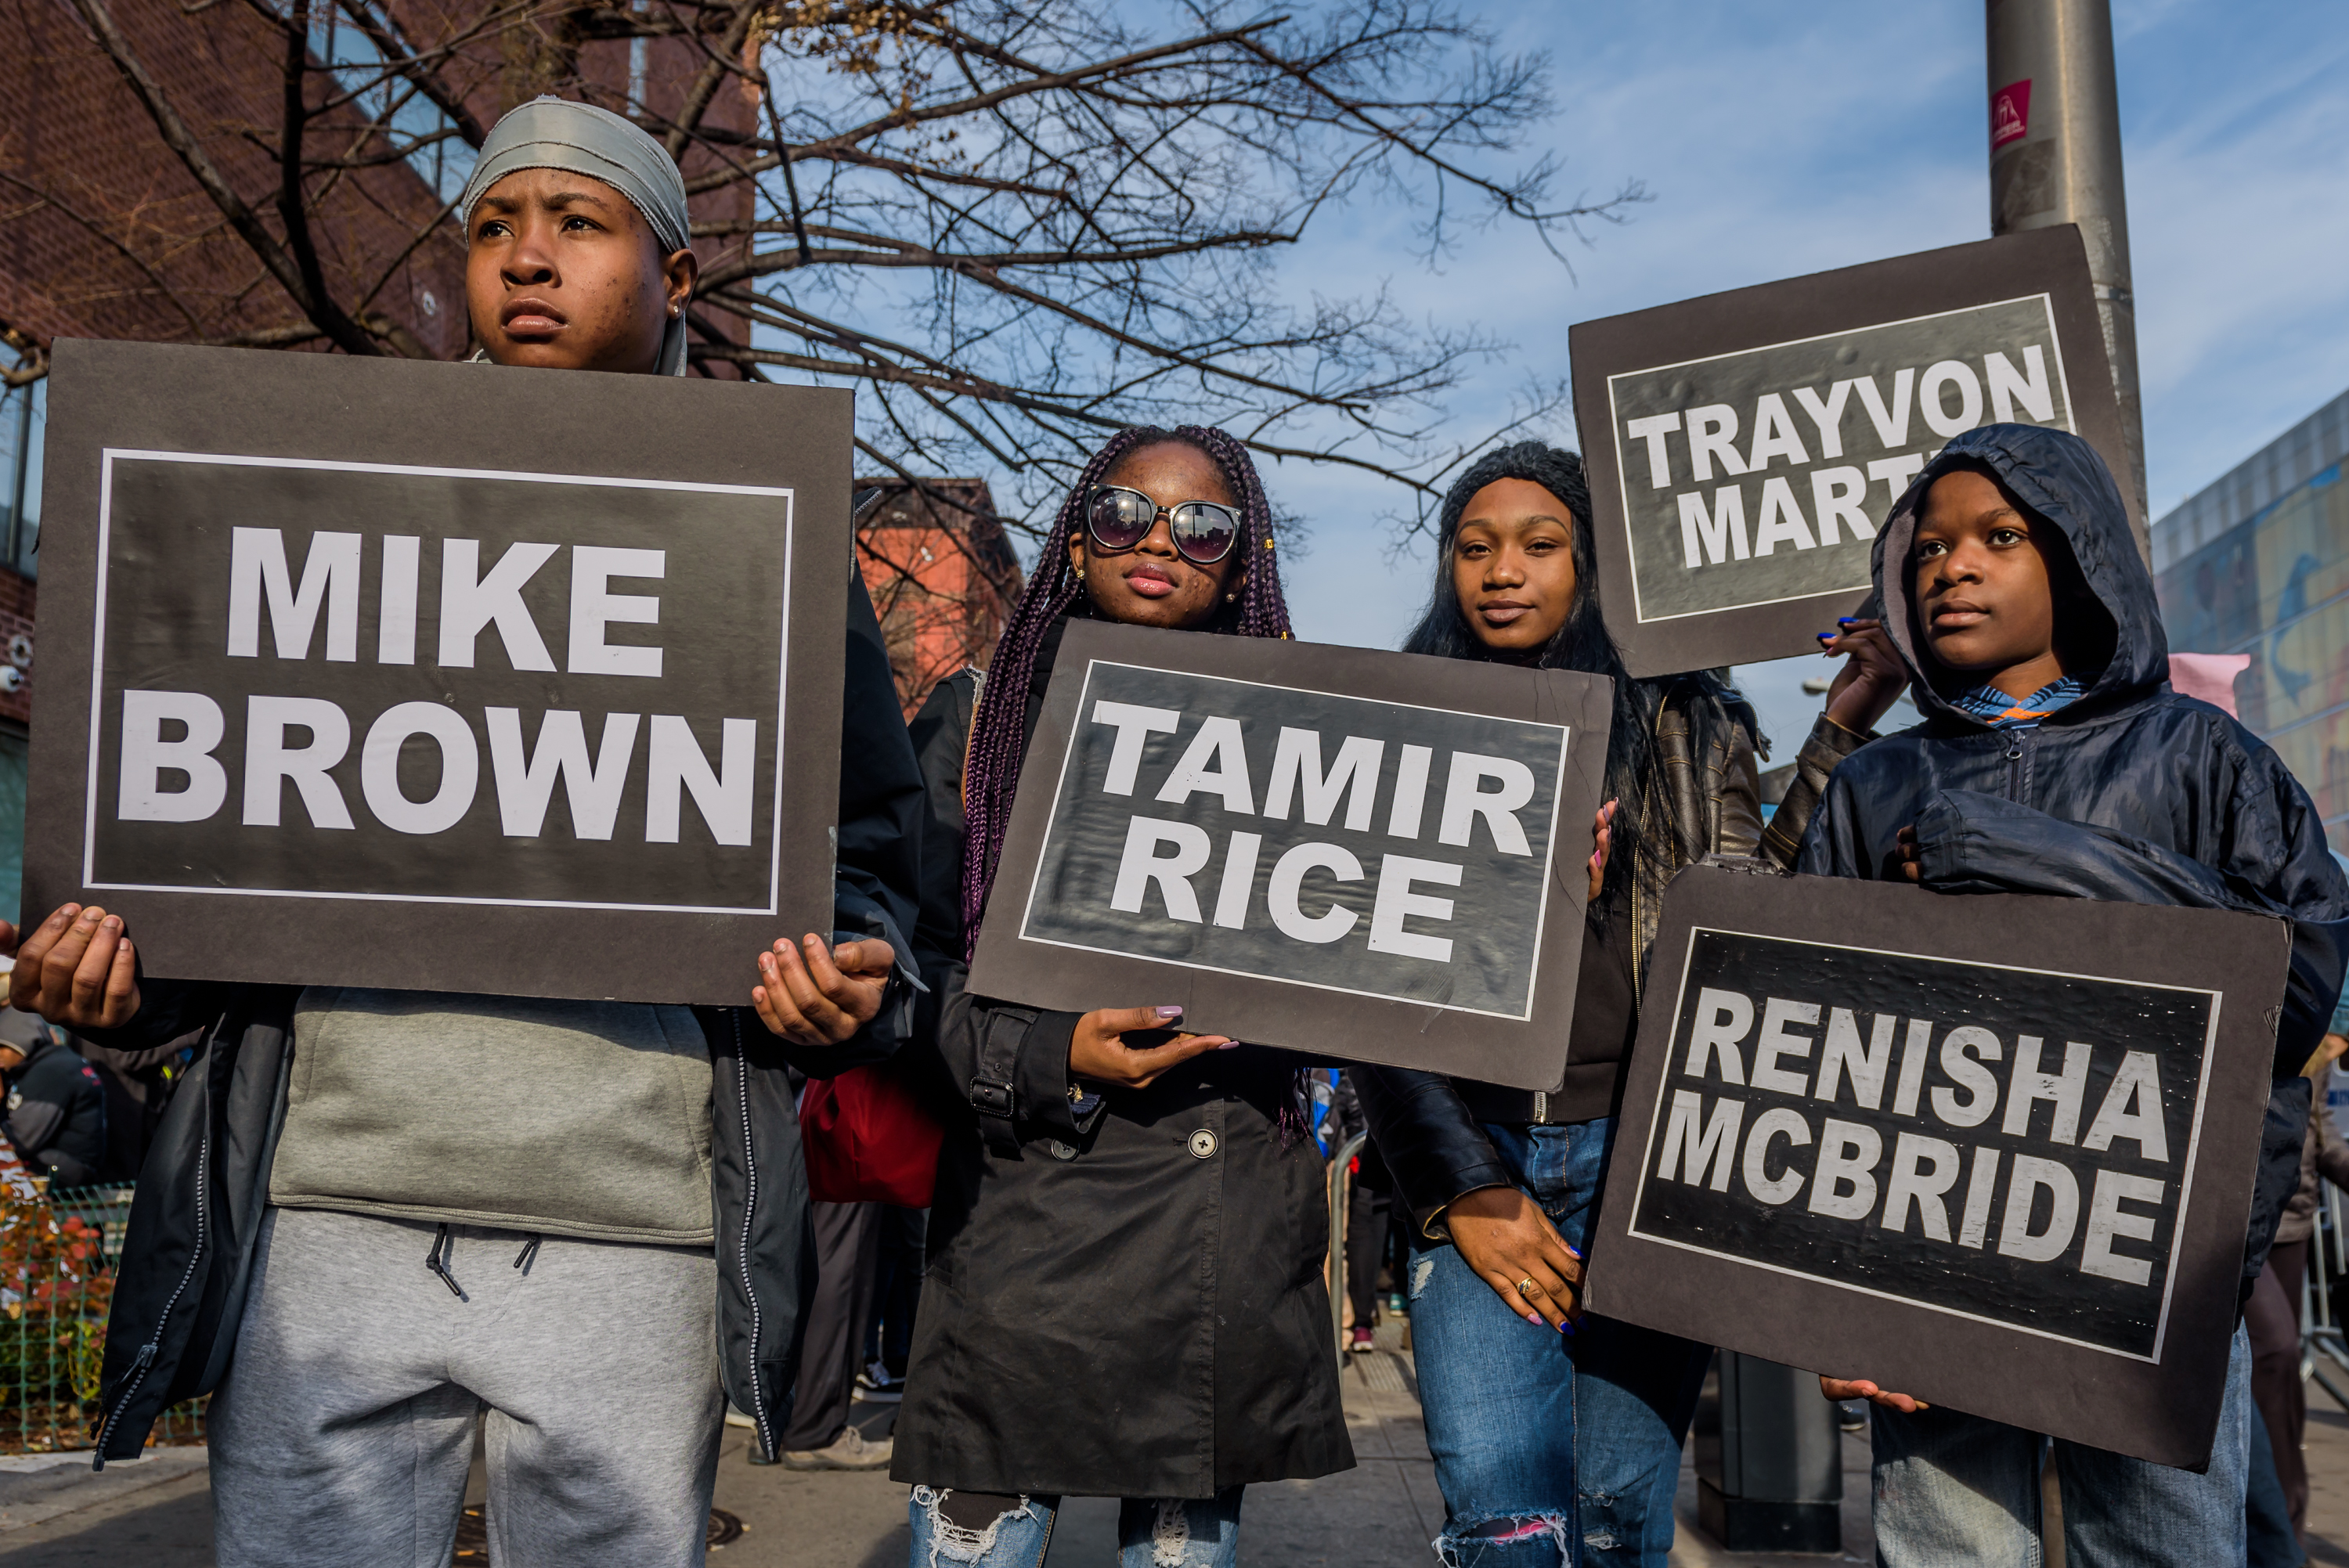 Students from South Bronx Community Charter High School with help from community leaders gathered at the Schomburg Center for Research in Black Culture in Harlem and led the second annual Future of the City March against police brutality on December 2, 2017; marching with students from other New York City schools against police brutality and the unjust treatment of people of color. (Pacific Press&mdash;LightRocket via Getty Images)